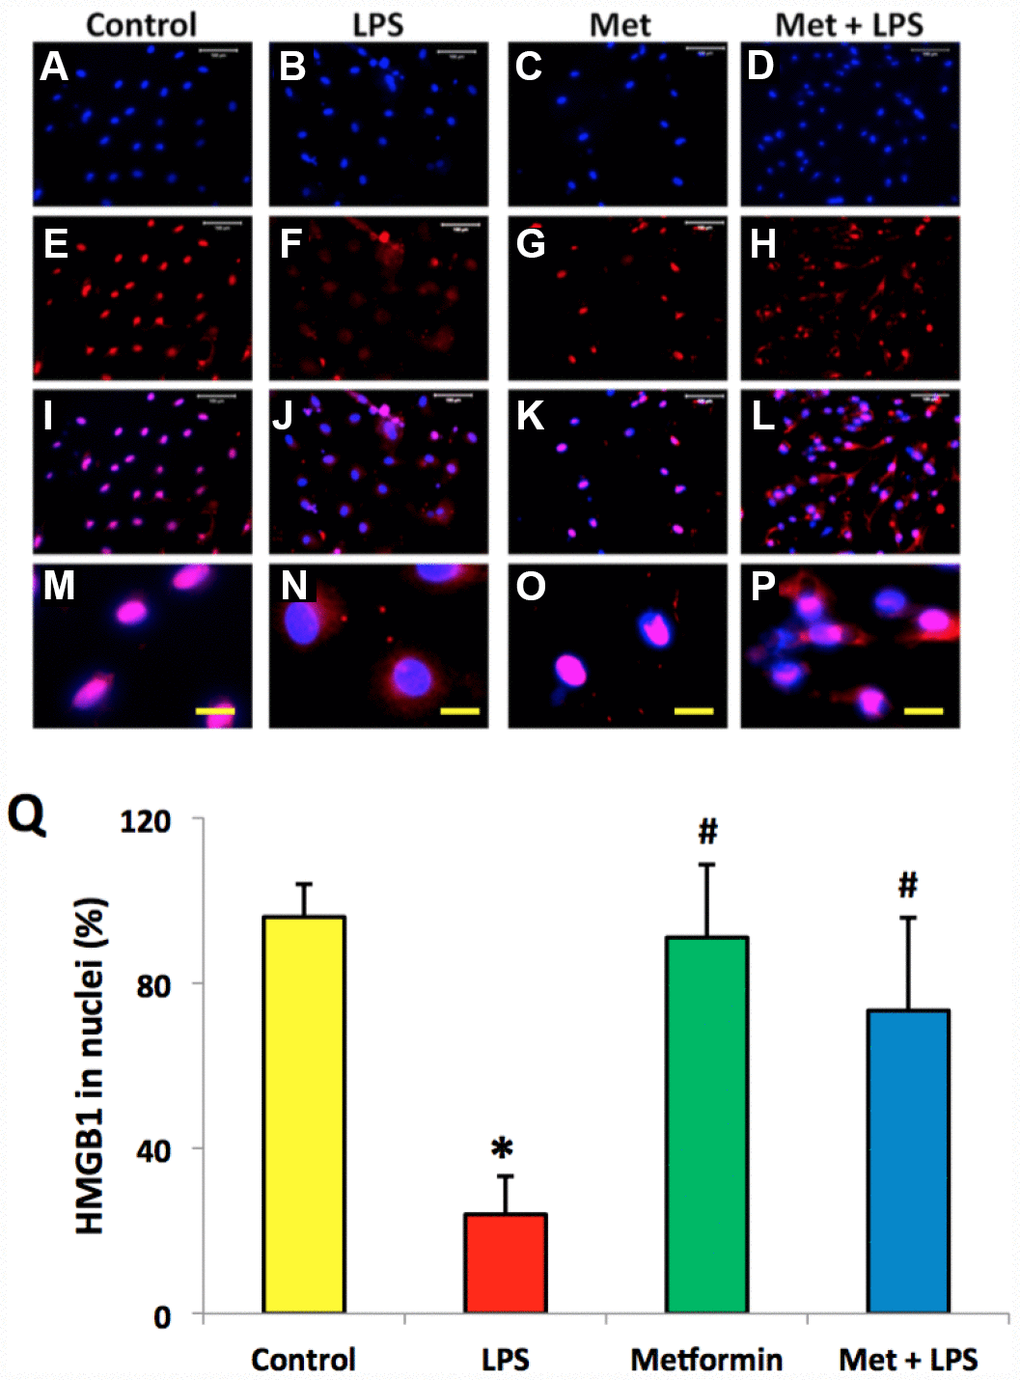 Metformin inhibited the relocation of HMGB1 in rabbit AF cells induced by LPS. (A–D) H33342 staining. (E–H) anti-HMGB1 antibody staining. (I–L) merged images of the H33342 stained images (A–D) and anti-HMGB1 antibody stained images (E–H). (M–P) the enlarged images of the box areas of the images of (E–H, Q) semi-quantification of positive stained HMGB1 in the nuclei of the cells. More than 95% of the nuclei of the normal cells were positively stained with HMGB1 (I, M, Q). LPS induced HMGB 1 releasing from the nucleus of rabbit AF cells to the cytoplasma (J, N, Q). Metformin blocked the relocation of HMGB1 as evidenced by the concentration of HMGB1 in the nuclei (K, O, Q). *p#p